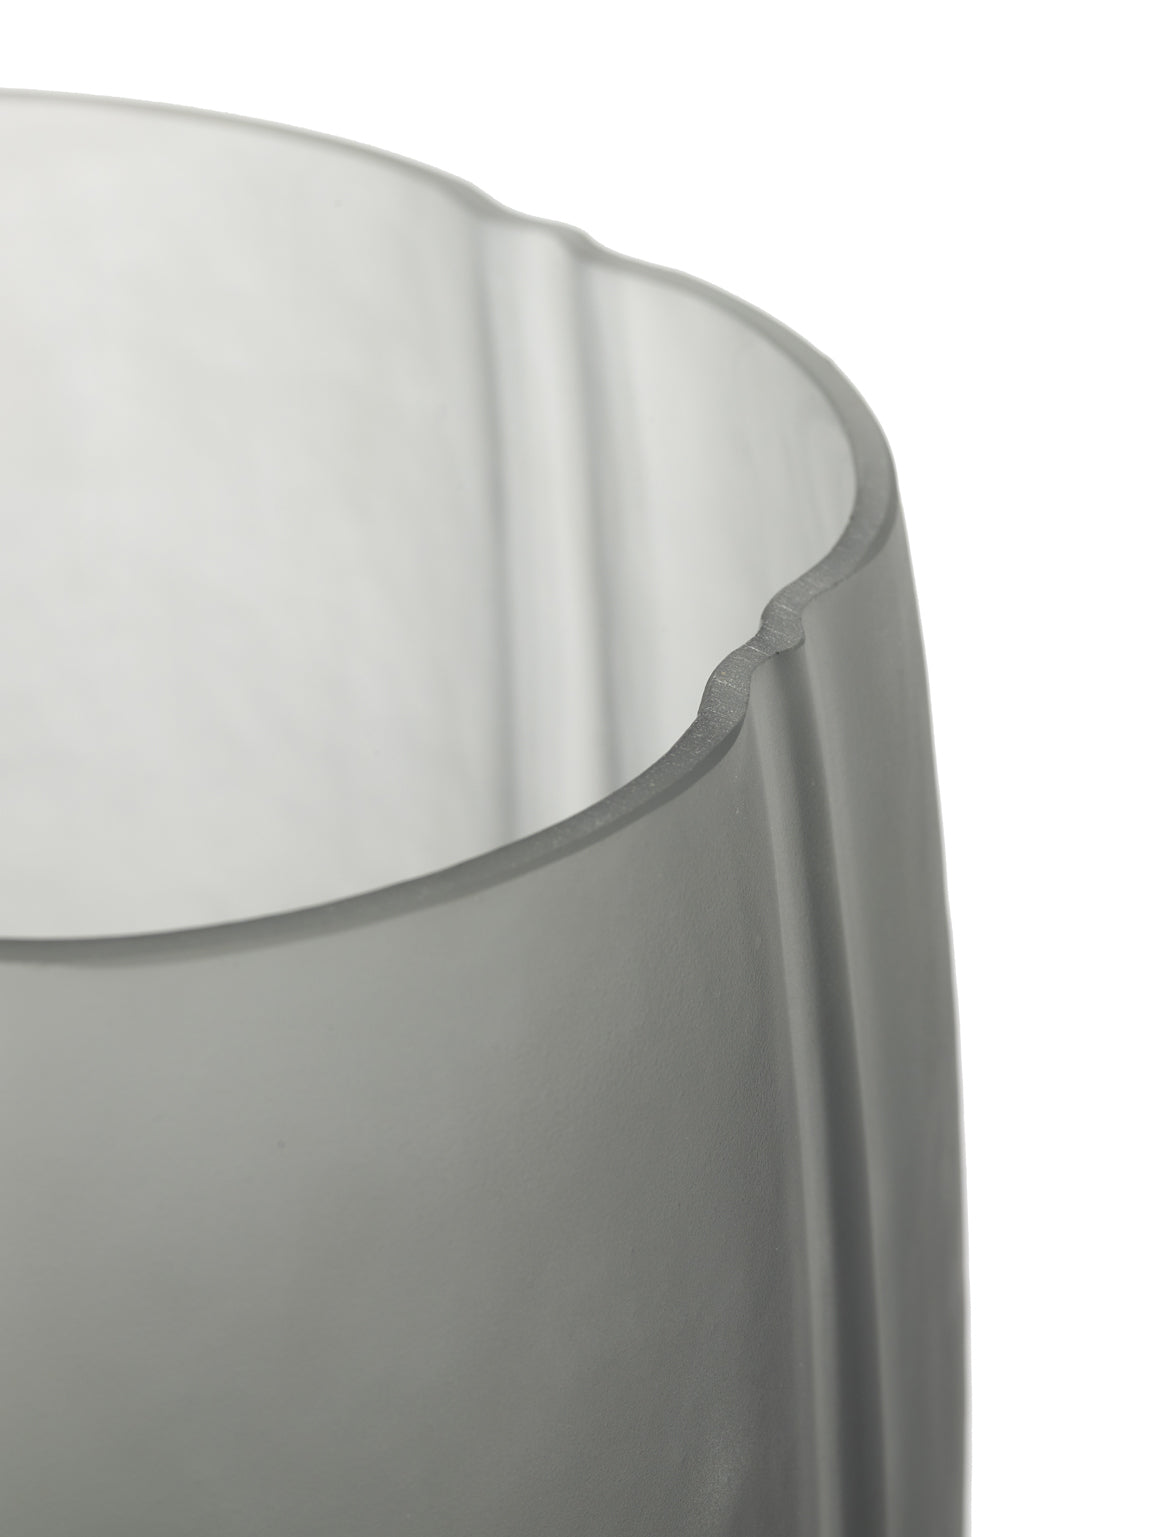 VASE GREY SHAPES BY PIET BOON - $486.00